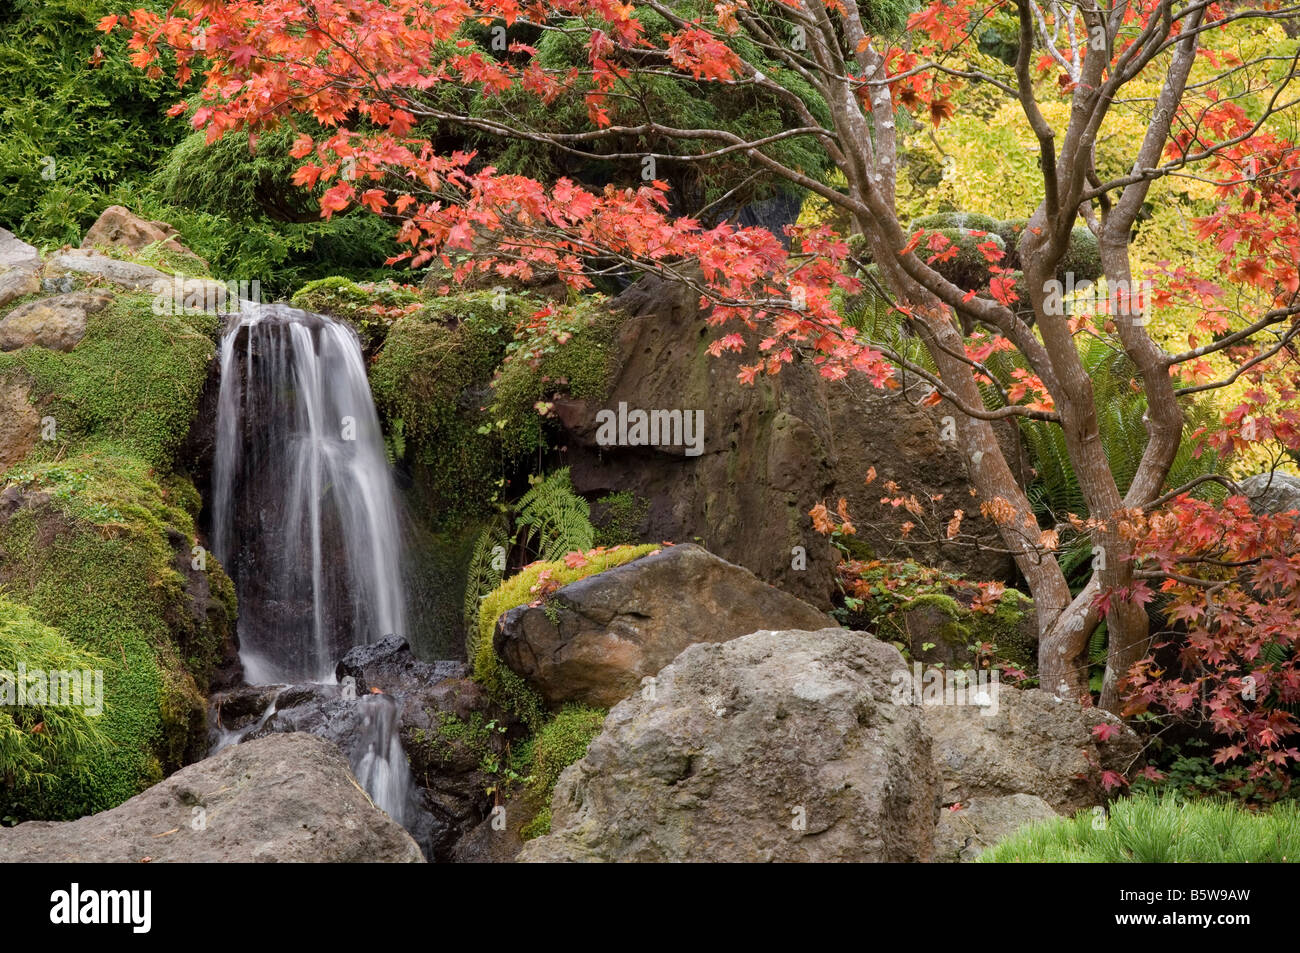 Japanese tea garden in golden gate park san francisco california japanese maple tree in fall color with waterfall stock photo